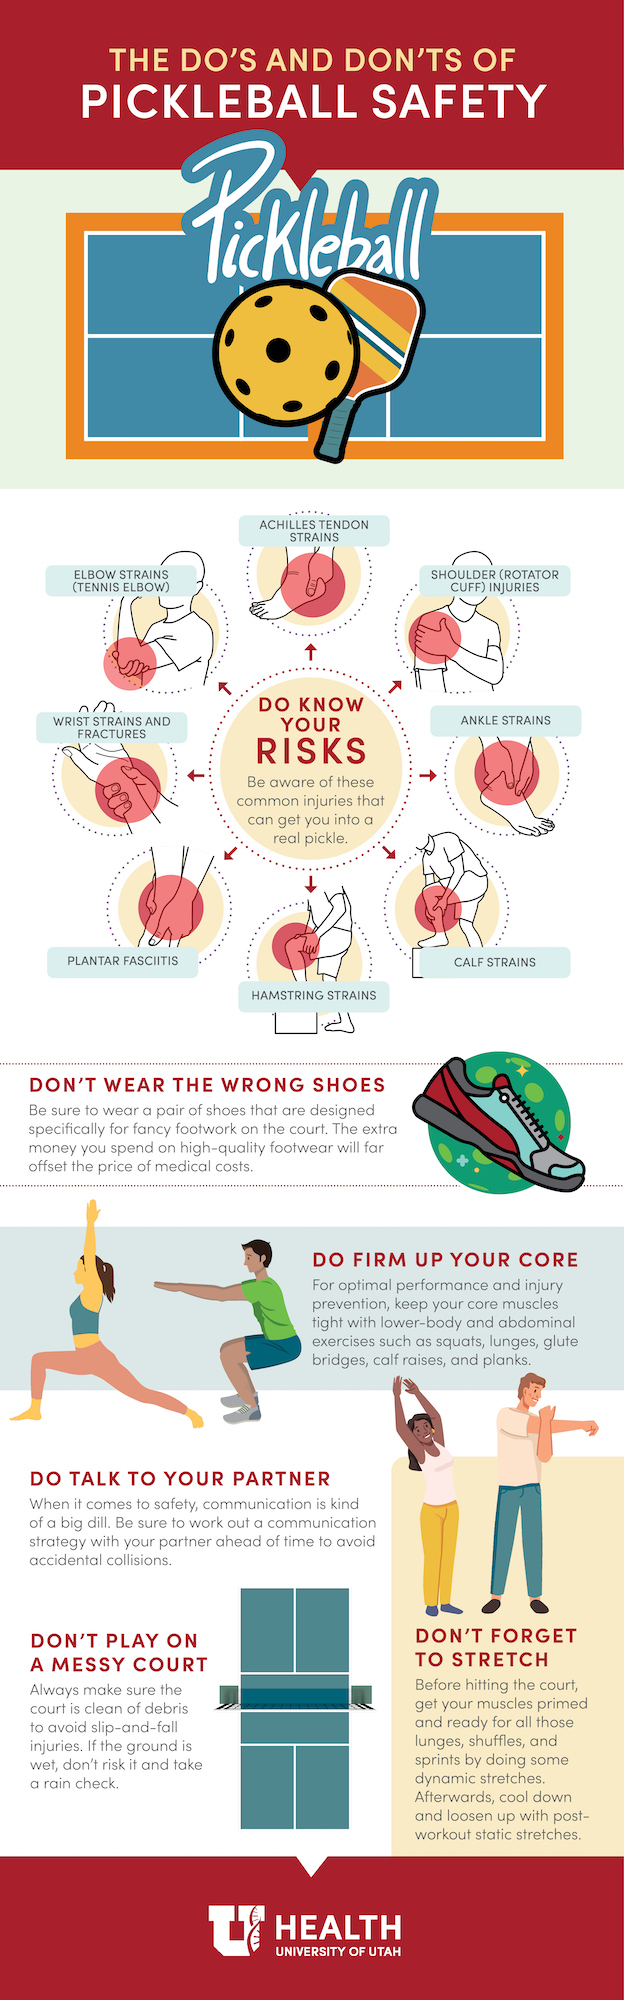 Pickleball Safety Infographic